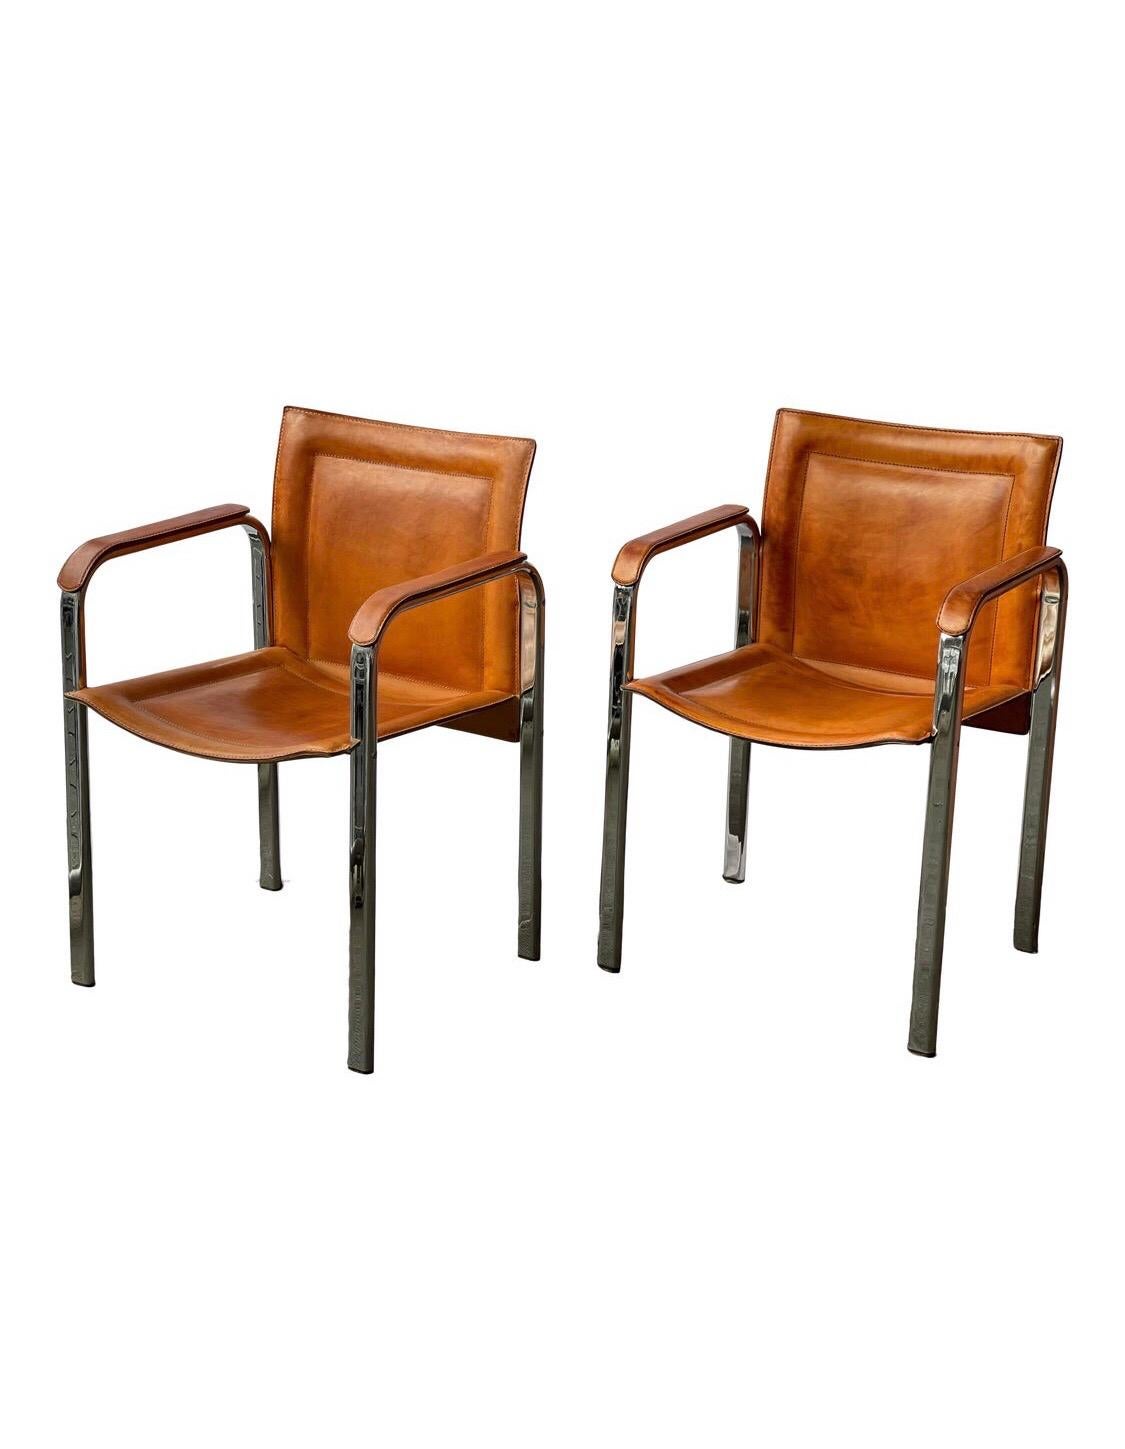 Swedish Mid-Century Modern Leather Chrome Accent Chairs, a Pair For Sale